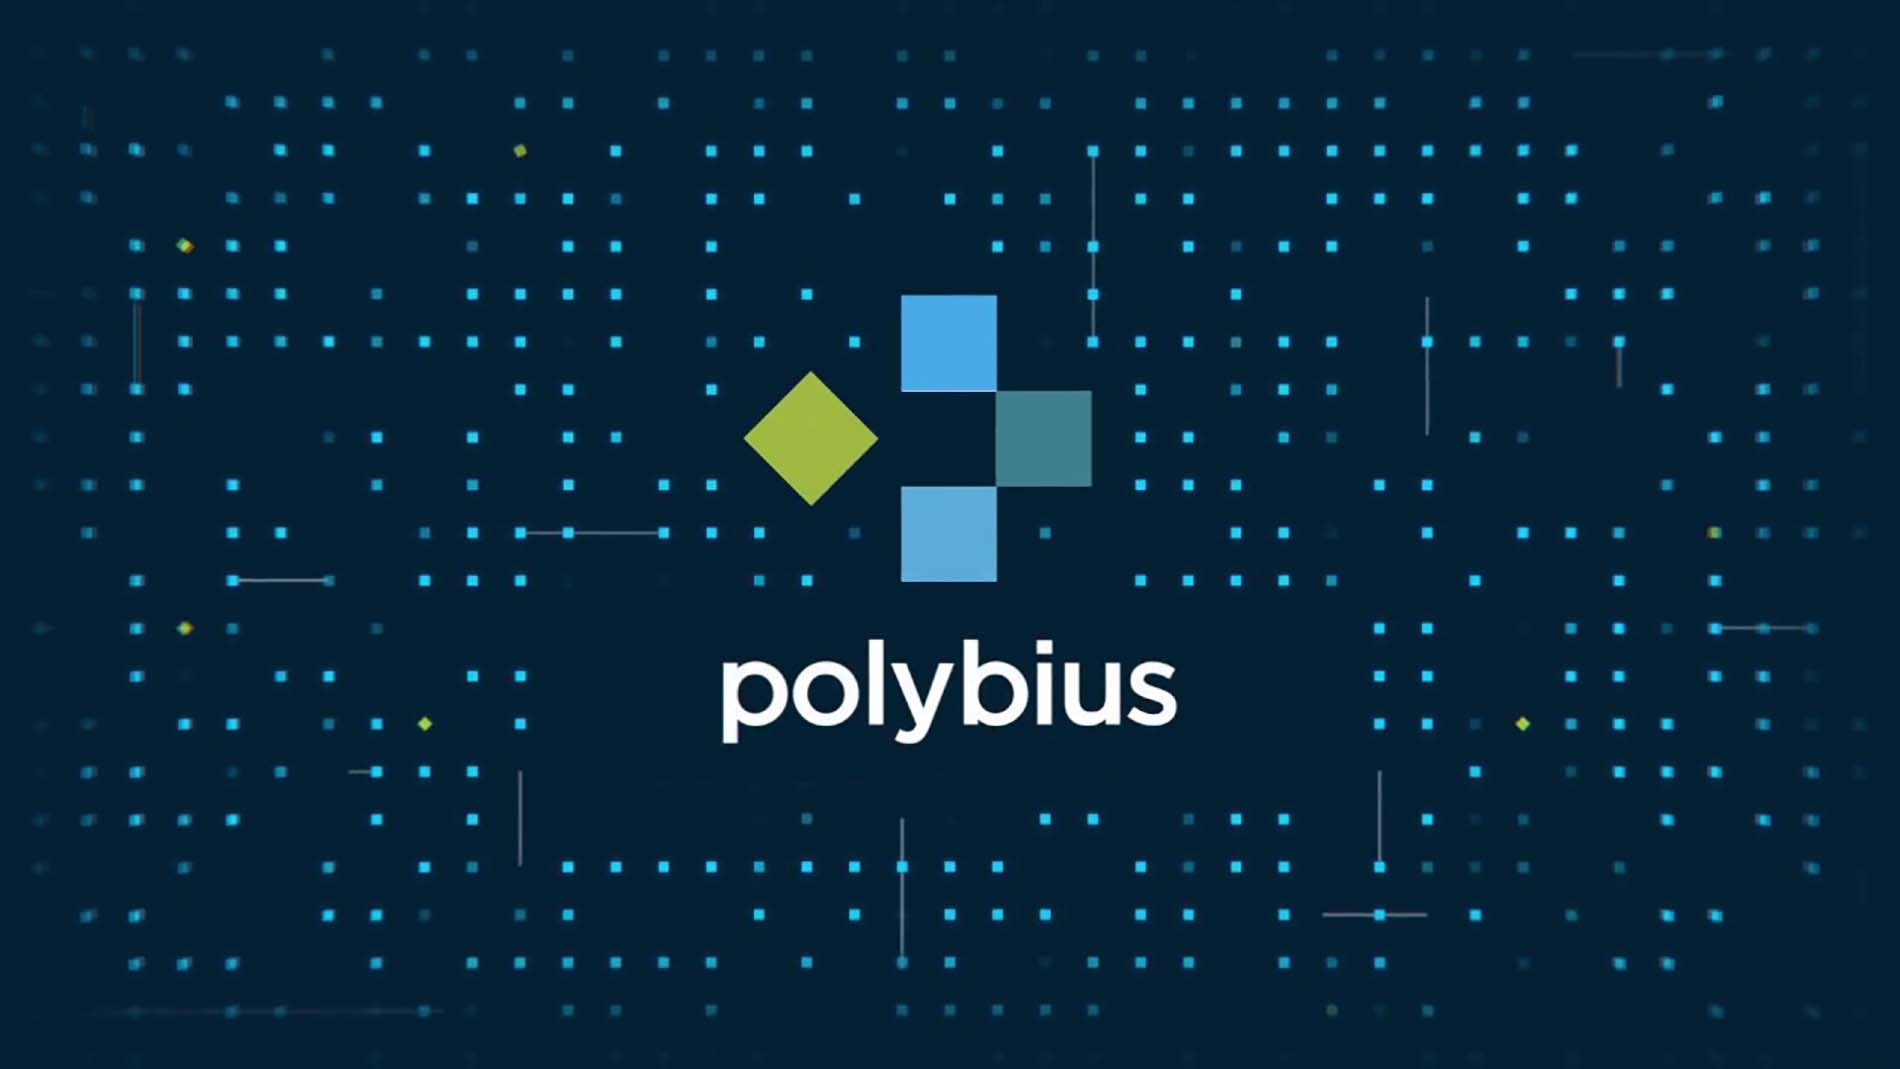 Polybius Project ICO raises $19 Million, Becomes Eligible for EU Banking License